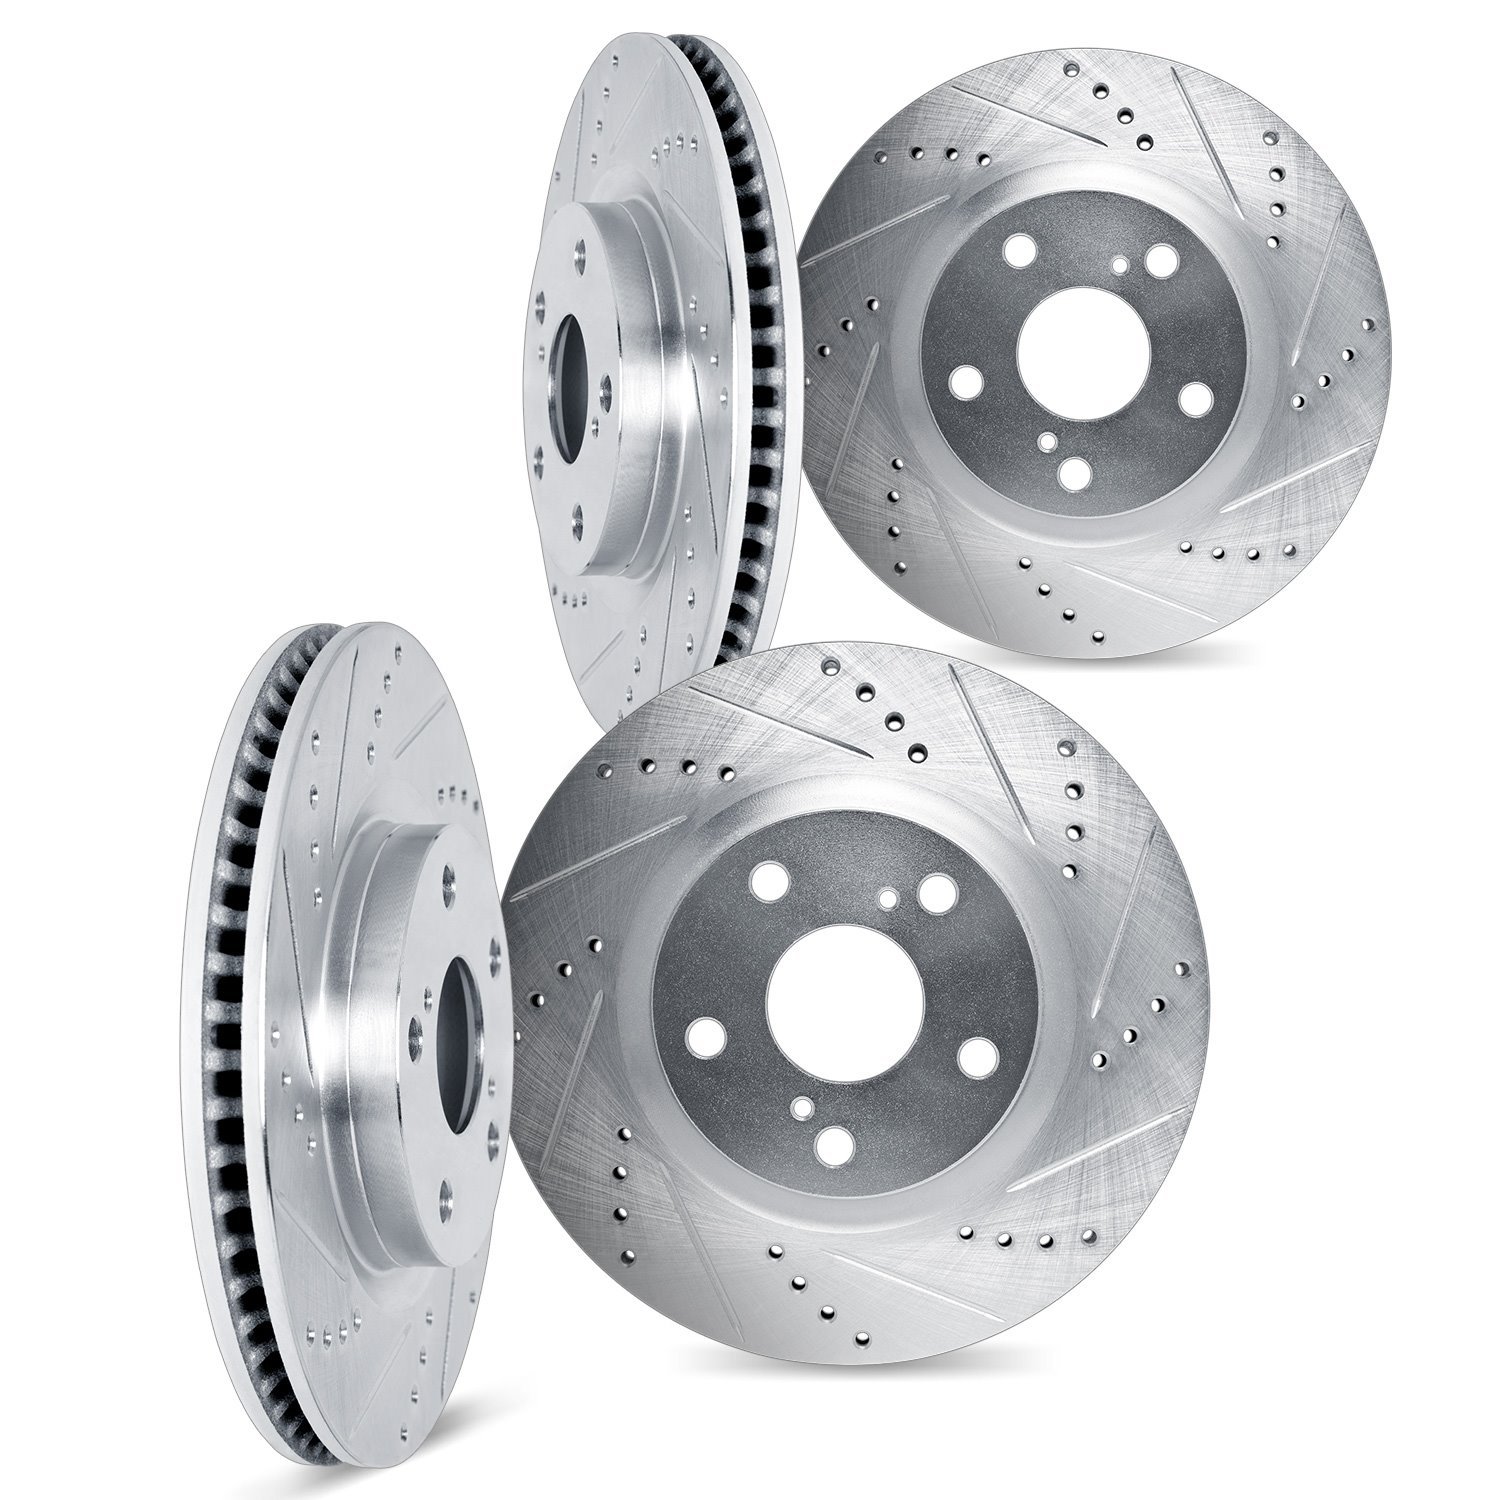 7004-39006 Drilled/Slotted Brake Rotors [Silver], Fits Select Mopar, Position: Front and Rear